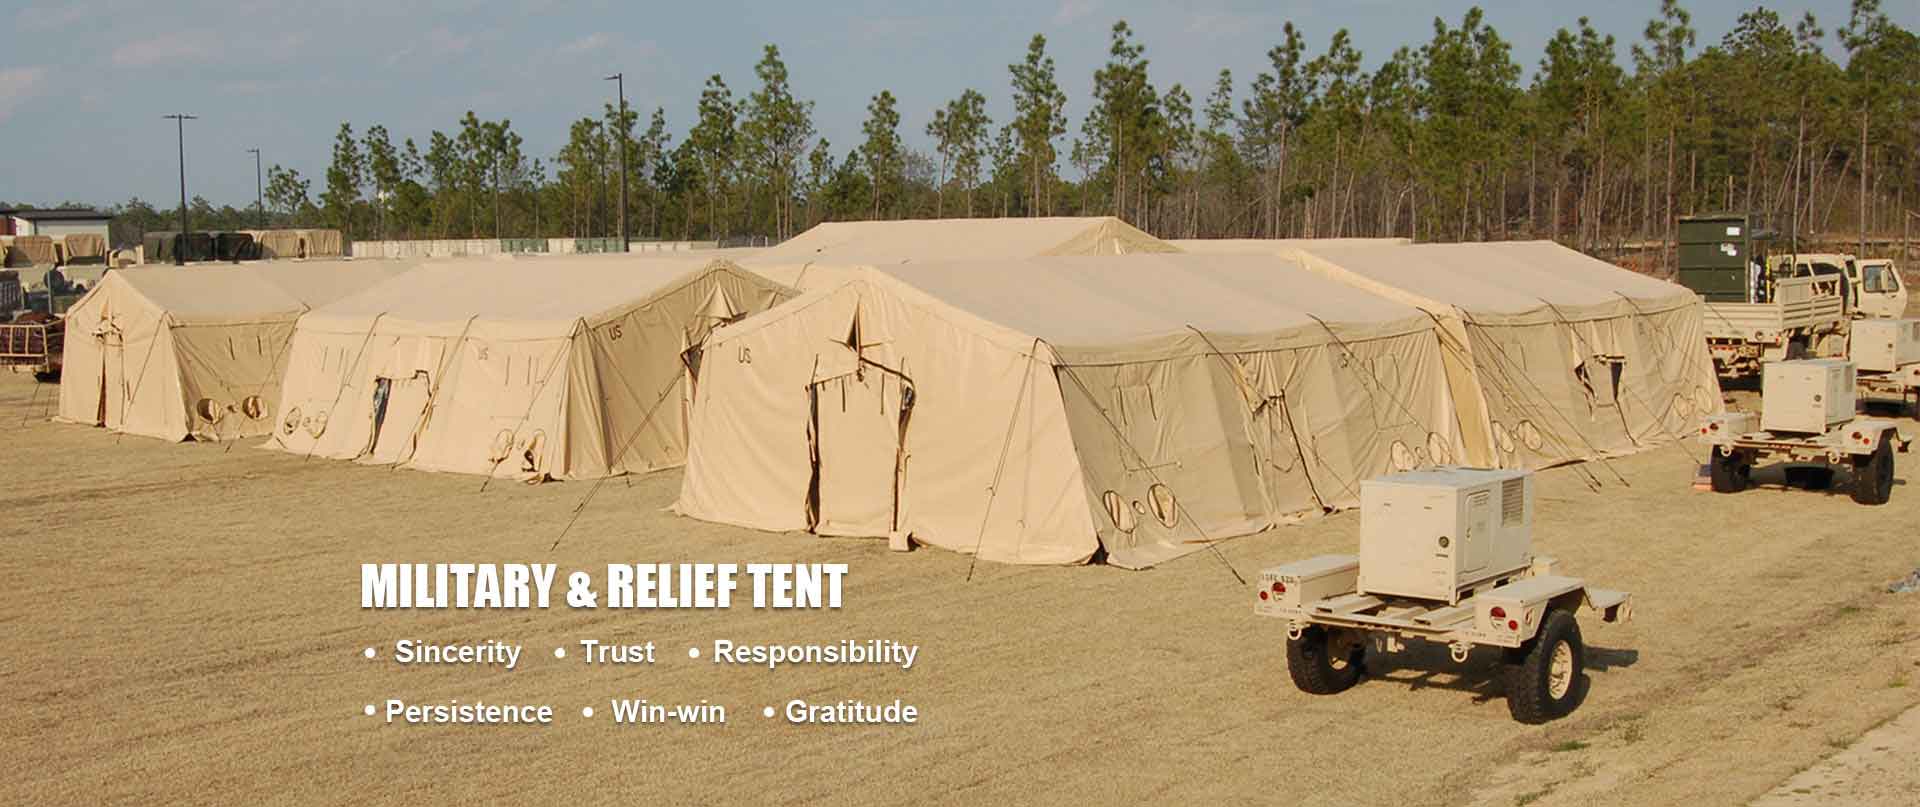 Military & Relief Tent